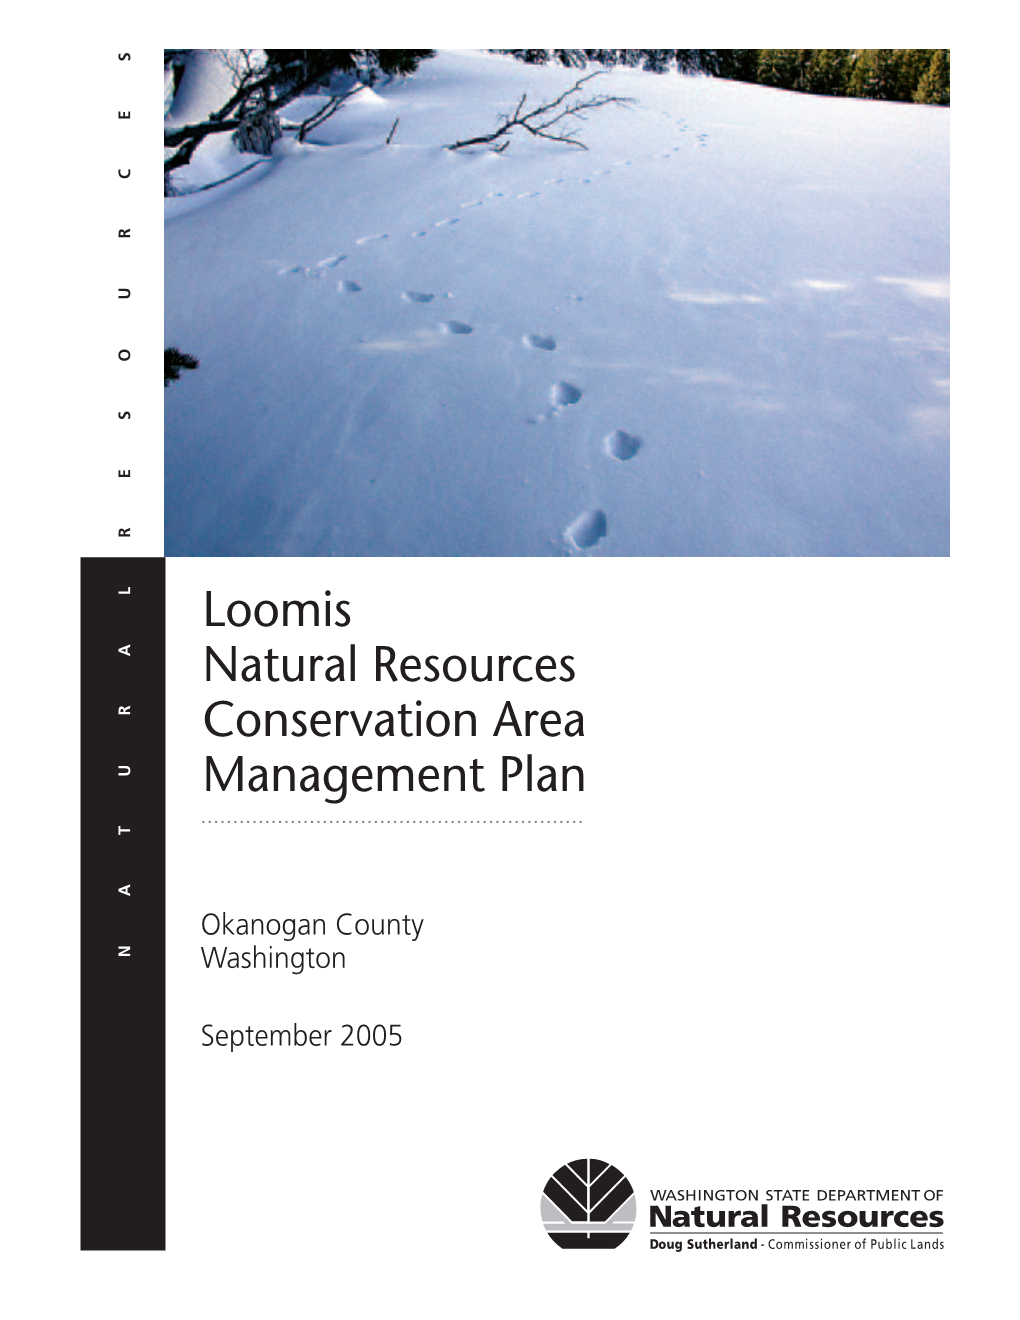 Loomis Natural Resources Conservation Area Management Plan